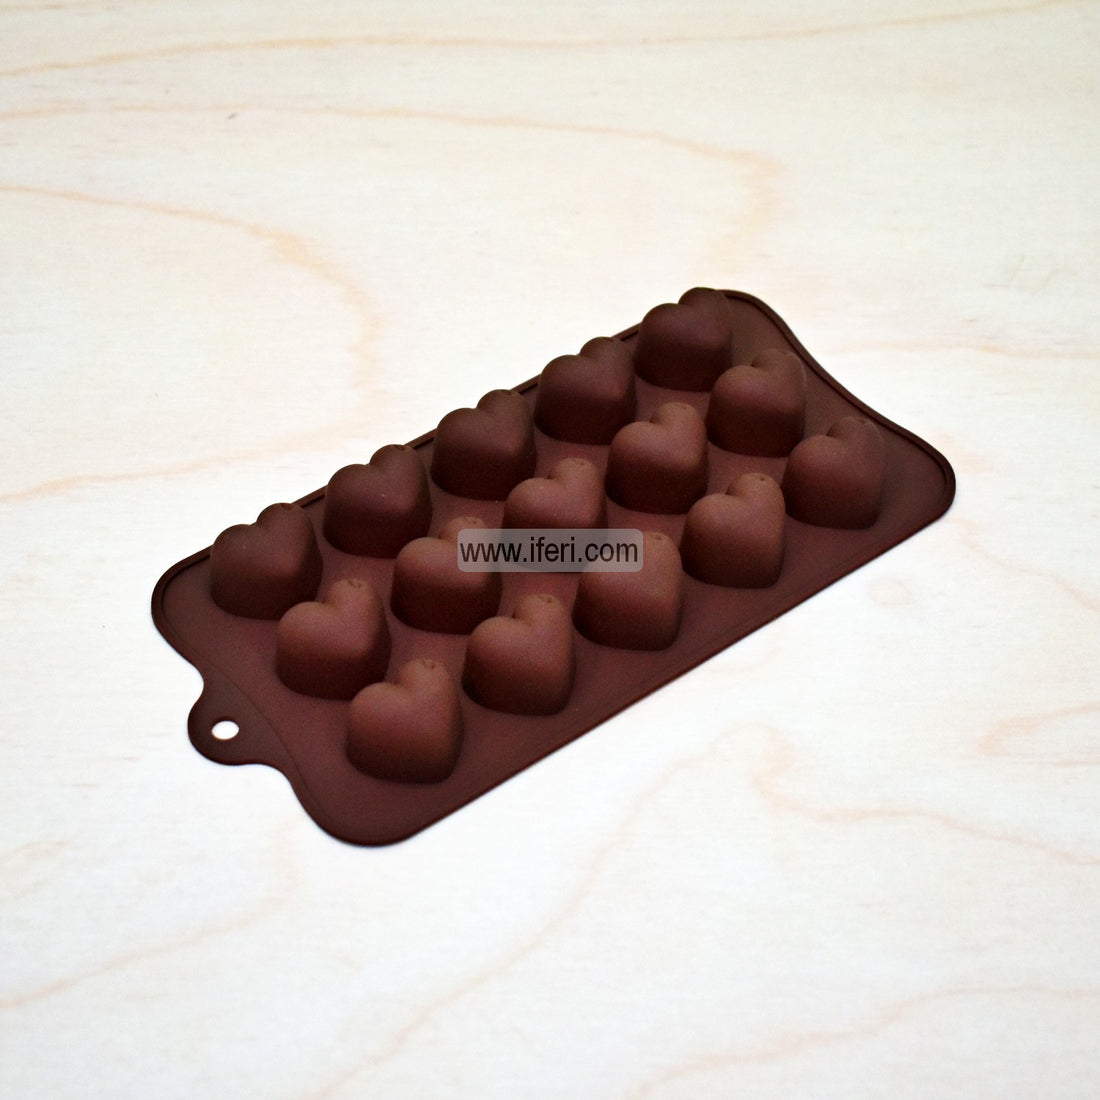 Buy Silicone Chocolate Mold through online from iferi.com in Bangladesh